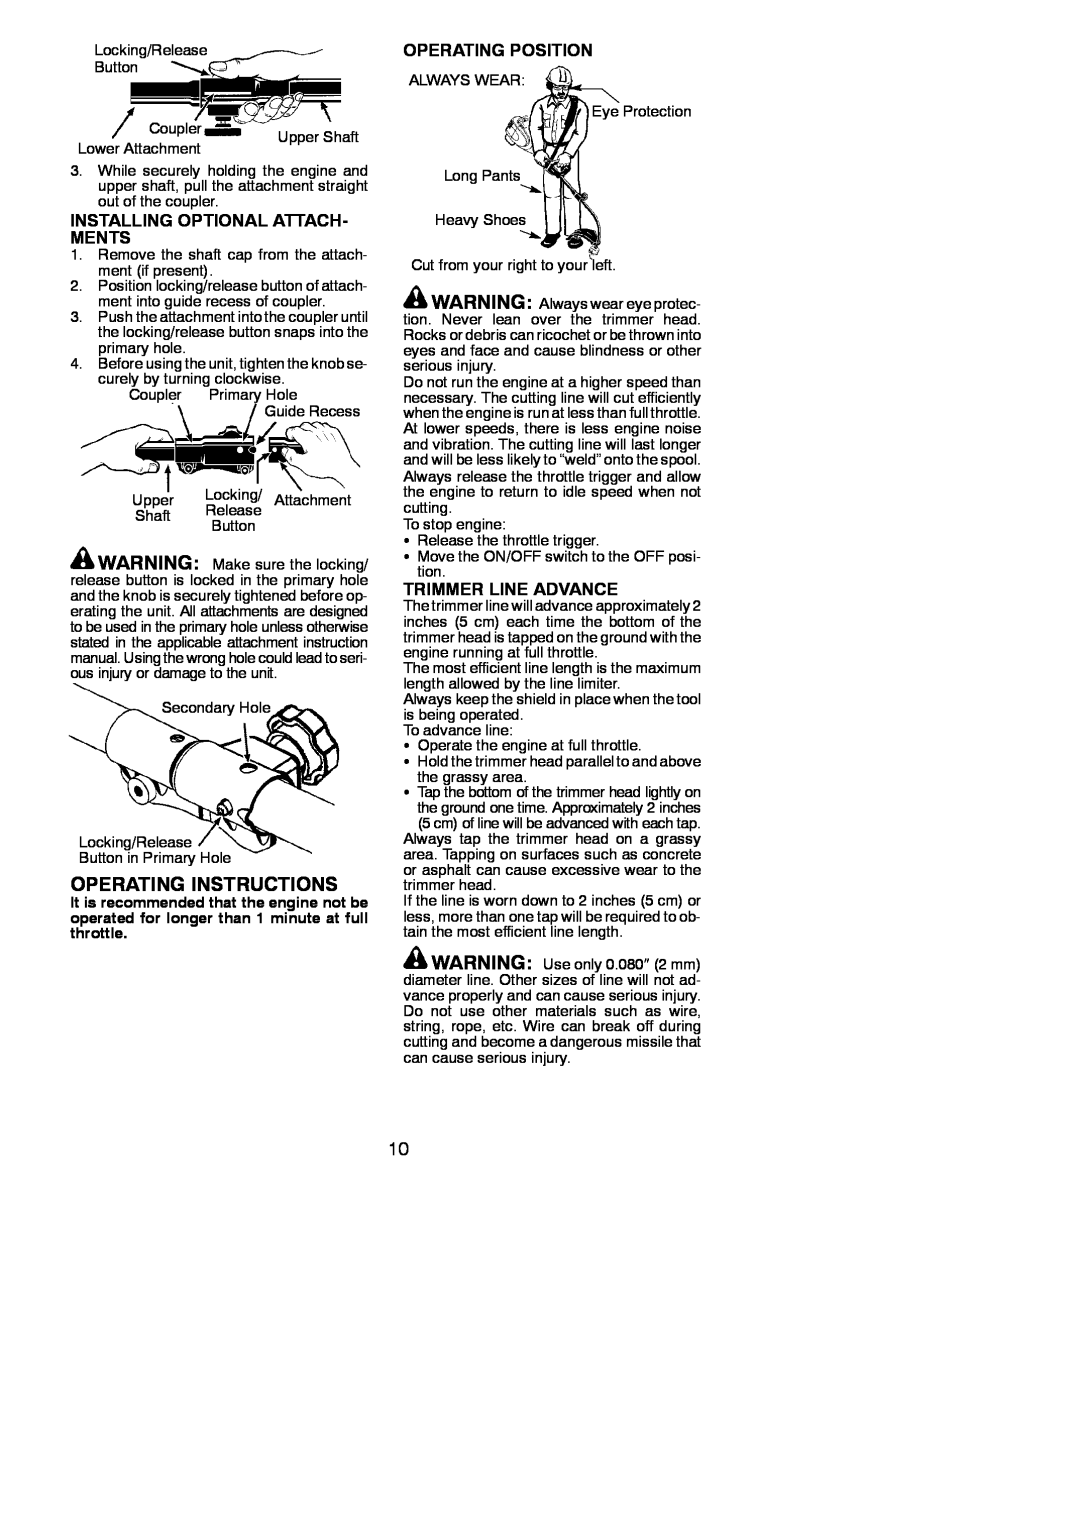 Poulan PP025 Operating Instructions, Installing Optional Attach- Ments, Operating Position, Trimmer Line Advance 